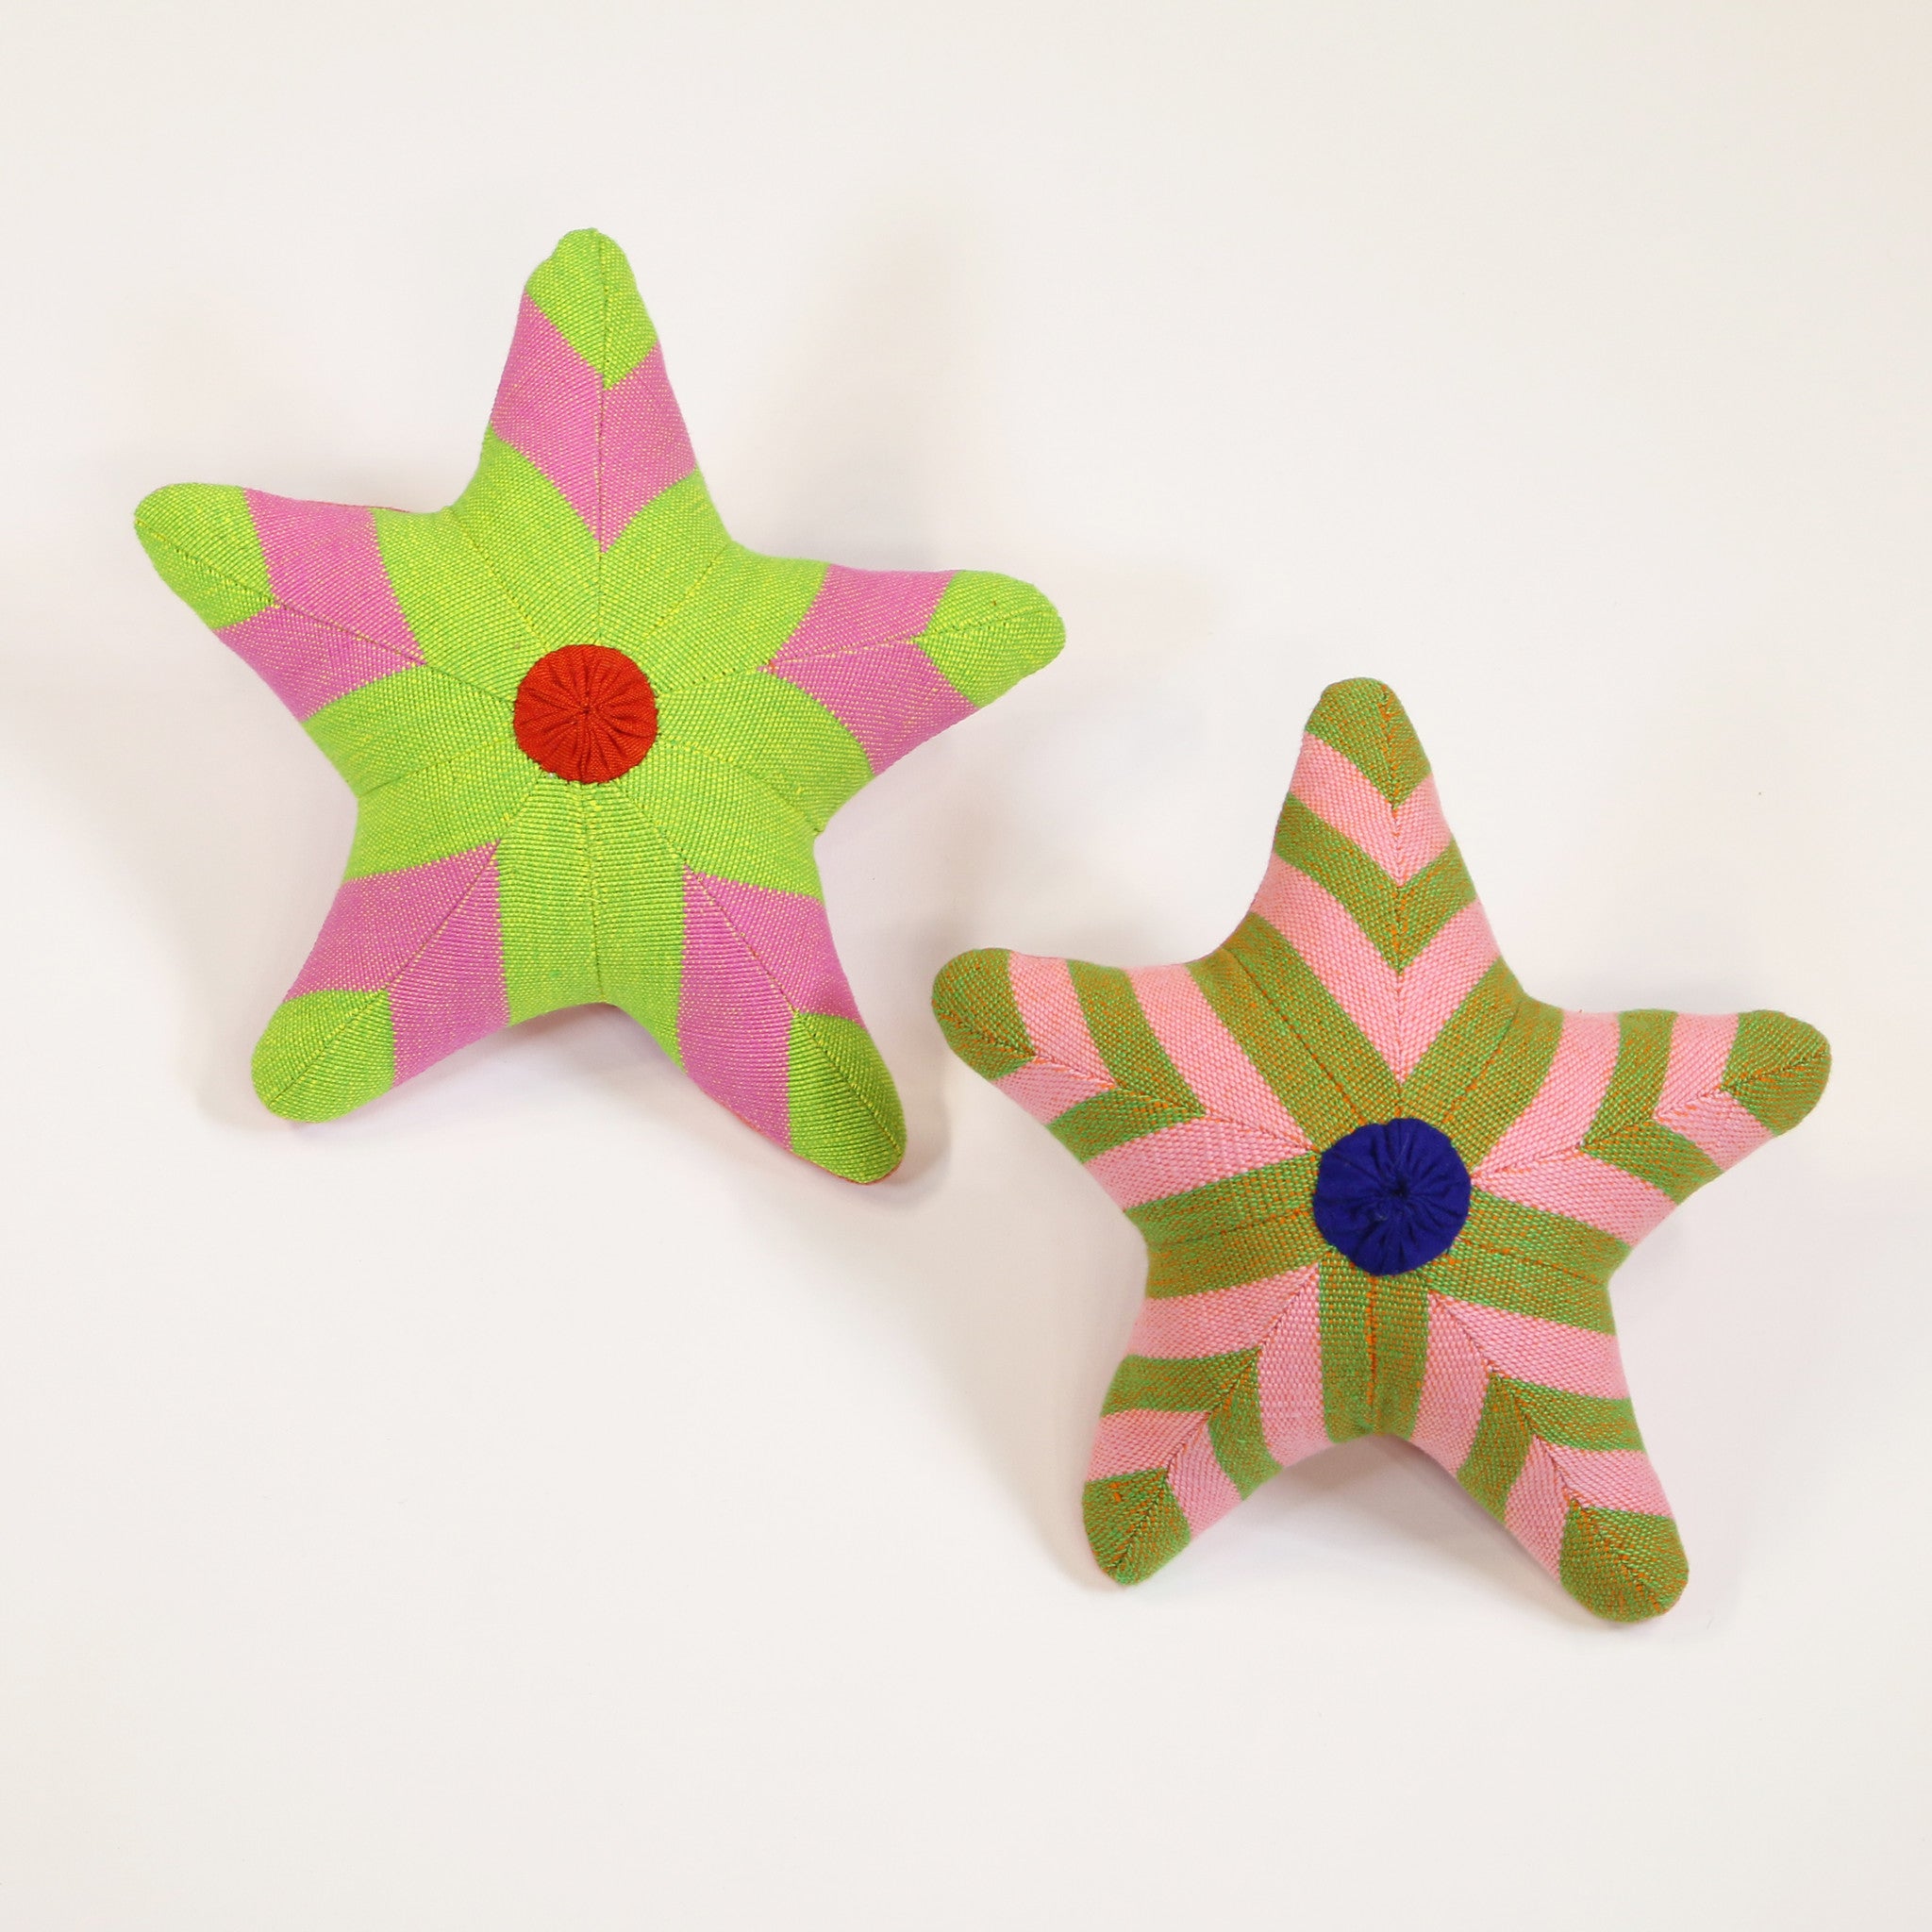 Stacey, the Starfish – all patterns (front view)